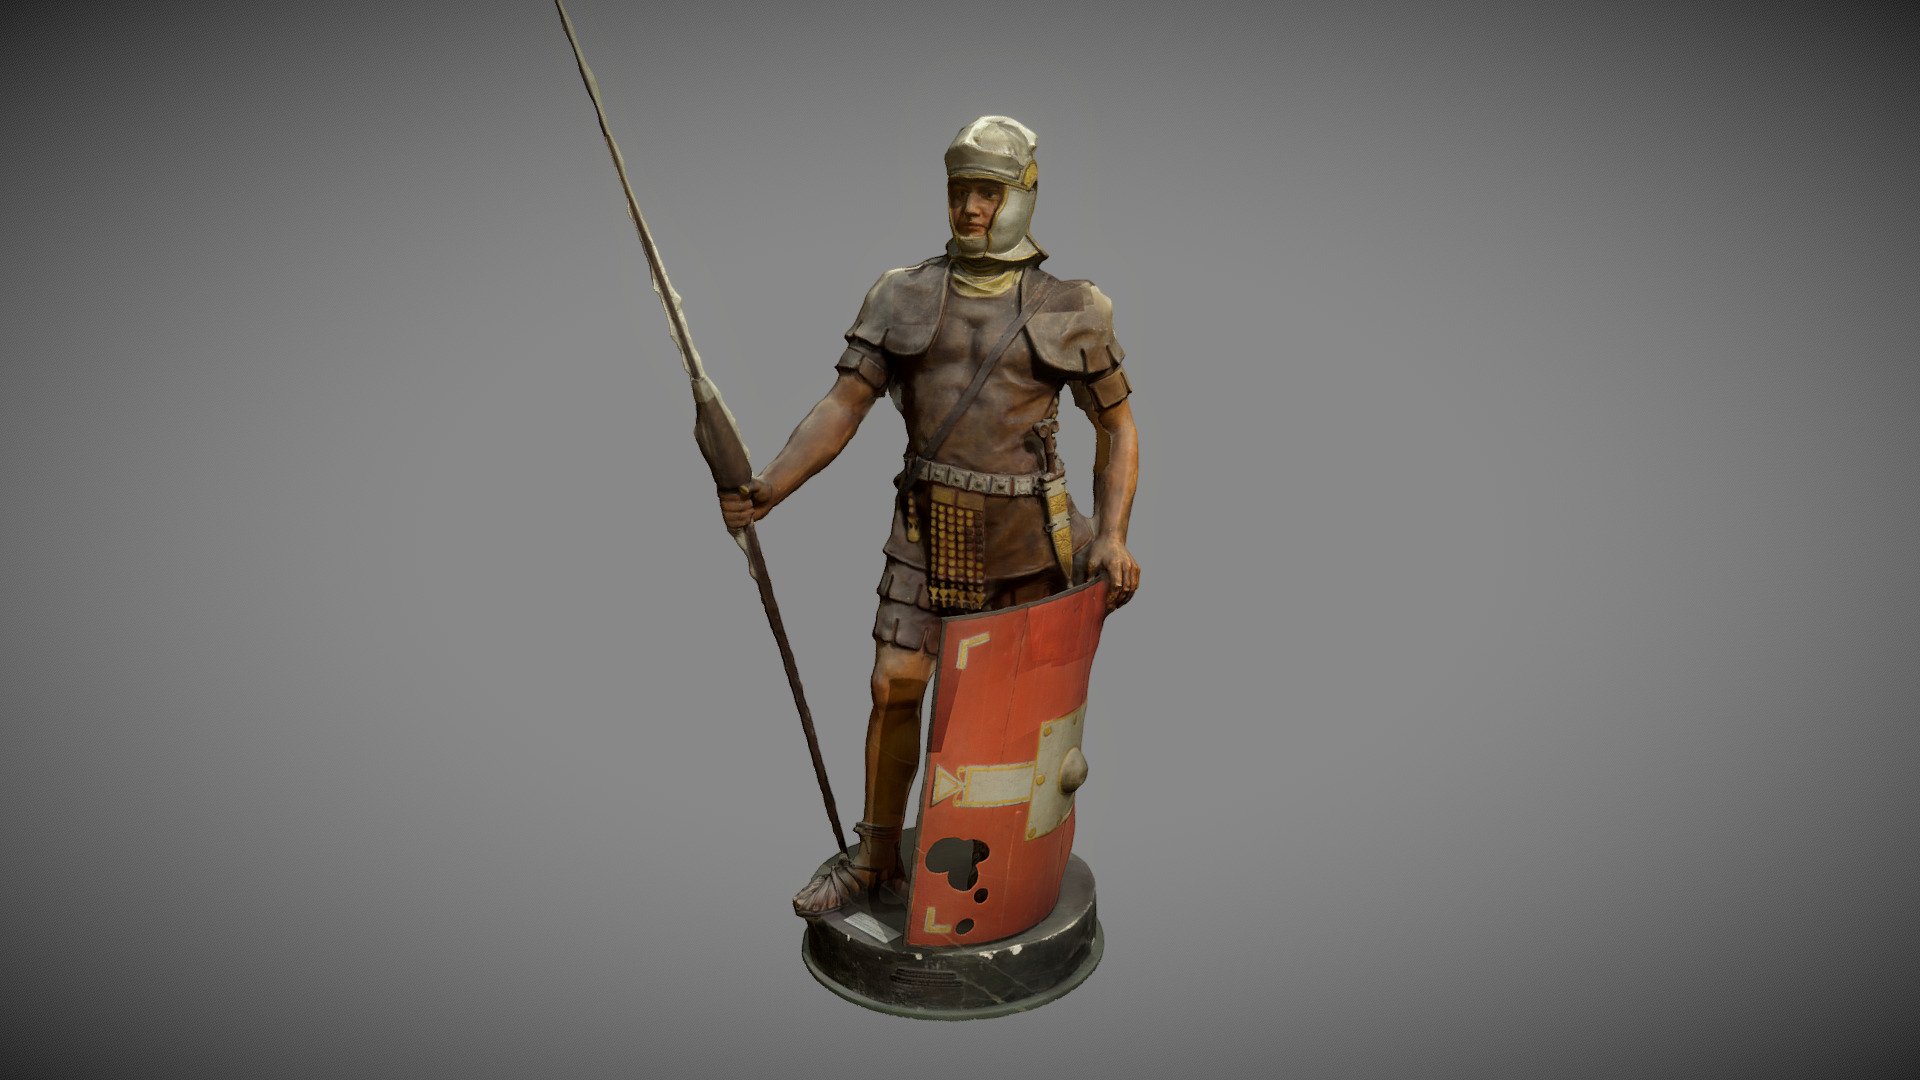 Ancient reconstruction of a Roman legionnaire made around 1900 by the museum of Mainz in Germany. Musée d'Art et d'Histoire (Musée du Cinquantenaire, Brussels, Belgium). Made with CapturingReality.

For more updates, please consider to follow me on Twitter at @GeoffreyMarchal.
https://twitter.com/GeoffreyMarchal - Roman legionnaire - Download Free 3D model by Geoffrey Marchal (@geoffreymarchal) 3d model